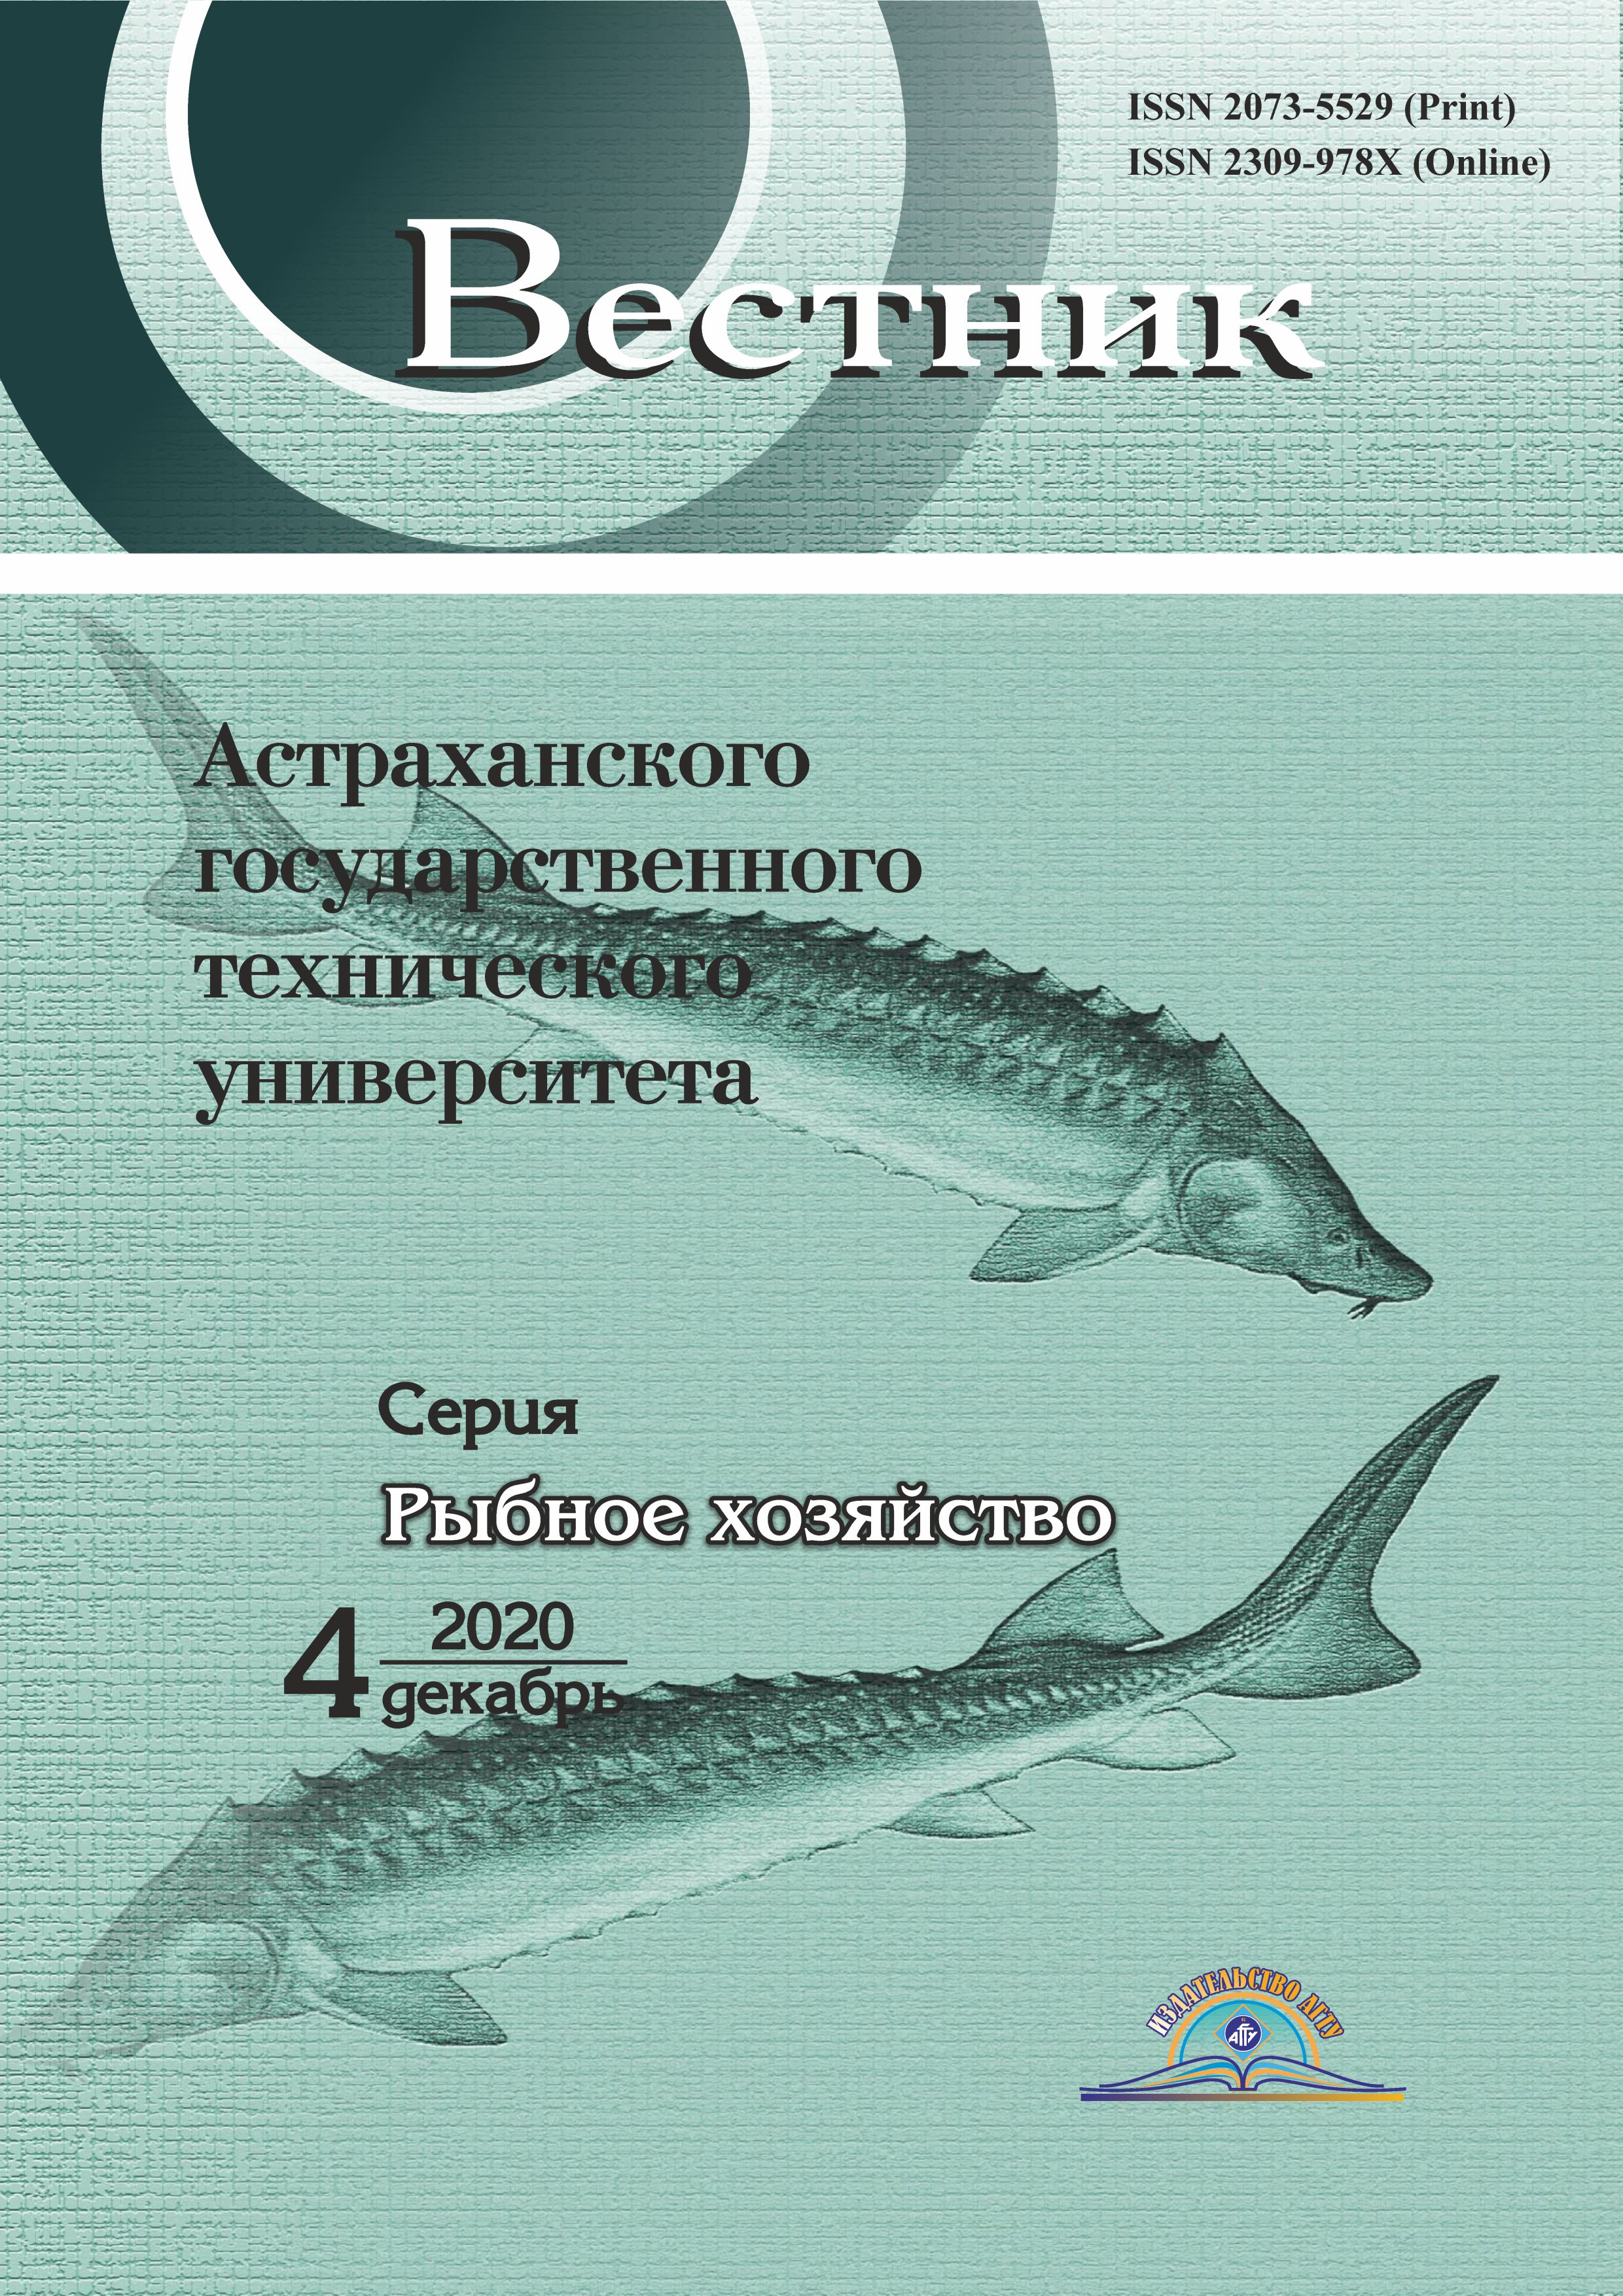                         ANNUAL VARIABILITY OF  ACIPENSER RUTHENUS MARSIGLII PARASITES IN LOWER RICHES OF IRTYSH RIVER
            